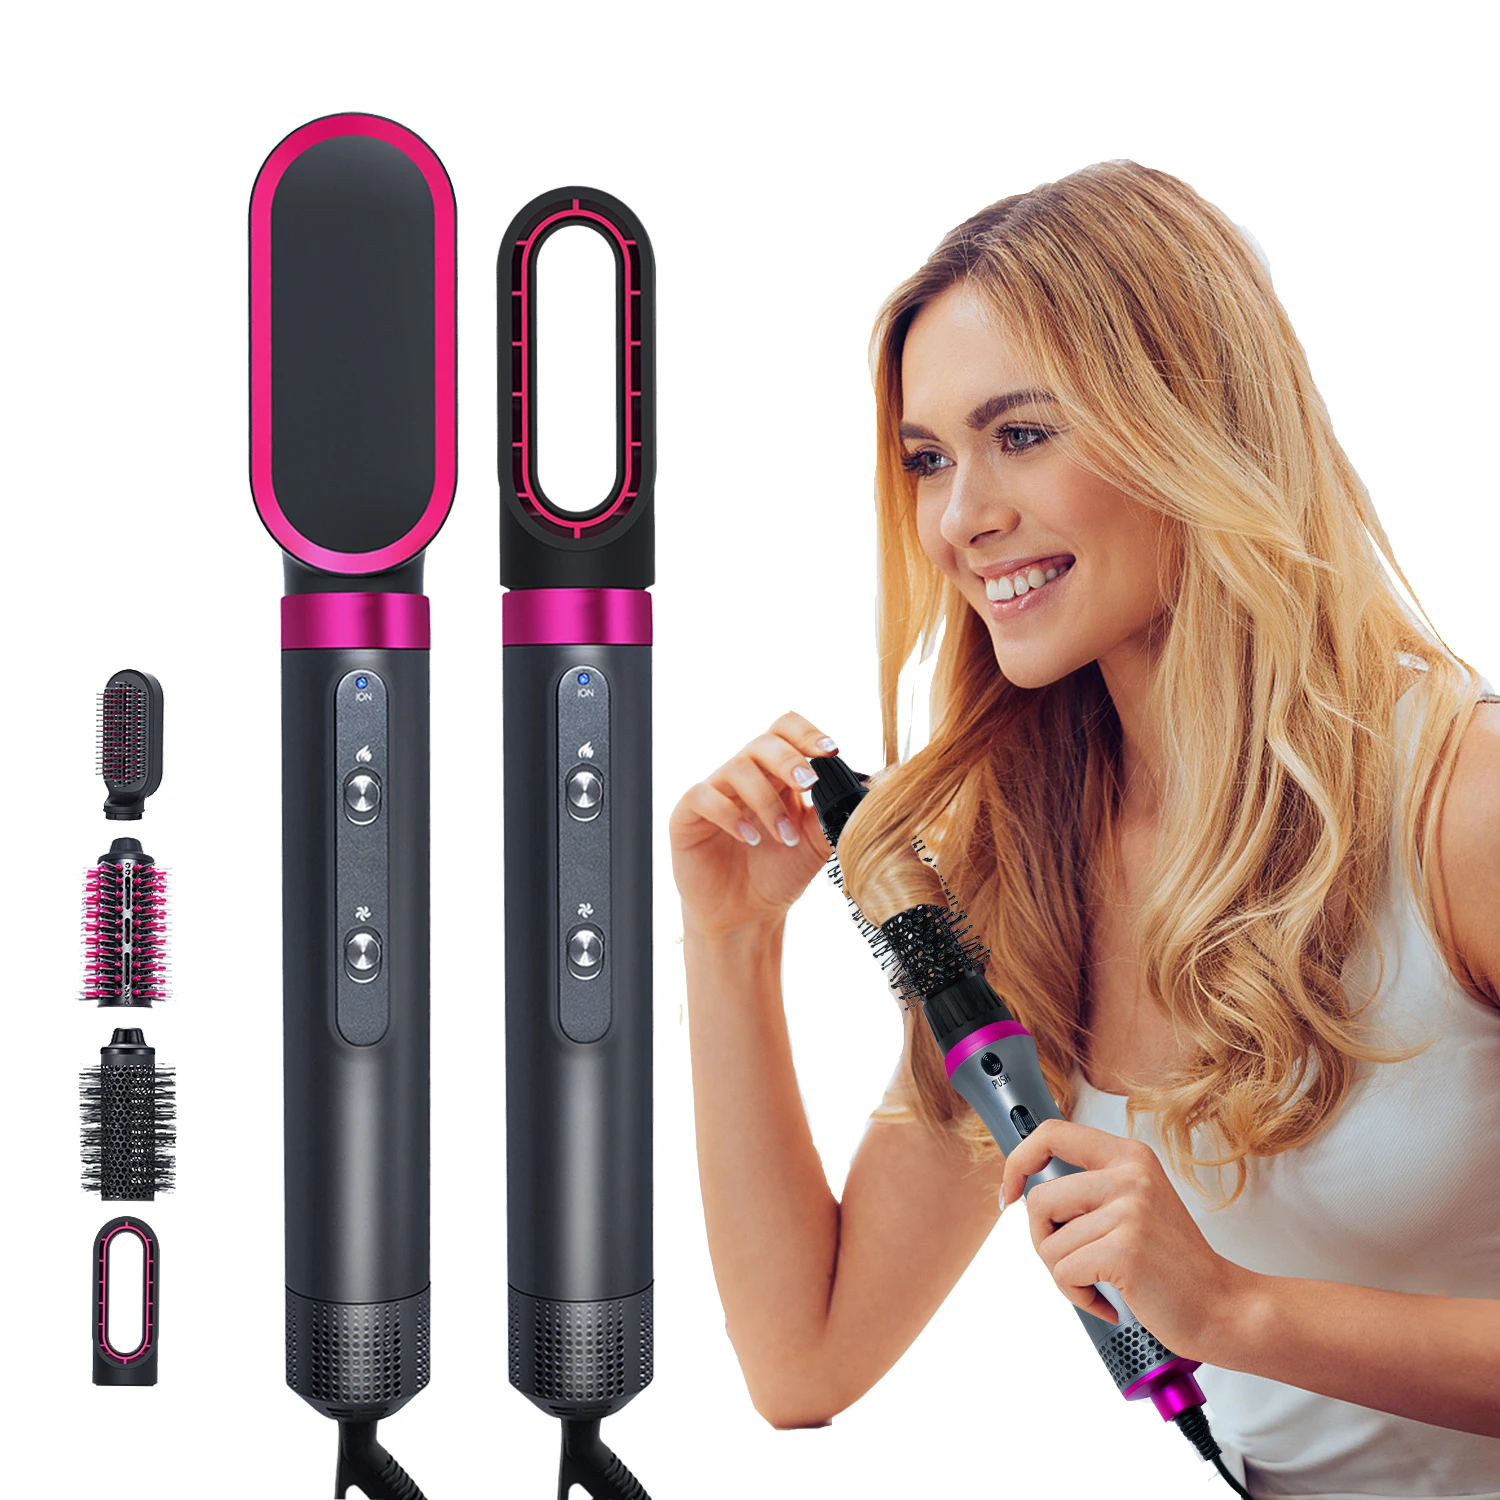 

2023 New-001 Hair Dryer Hot Air Brush Automatic 5 in 1 Hair Curler Volumizer Curling Iron Straightener Comb Salon Styling Tools